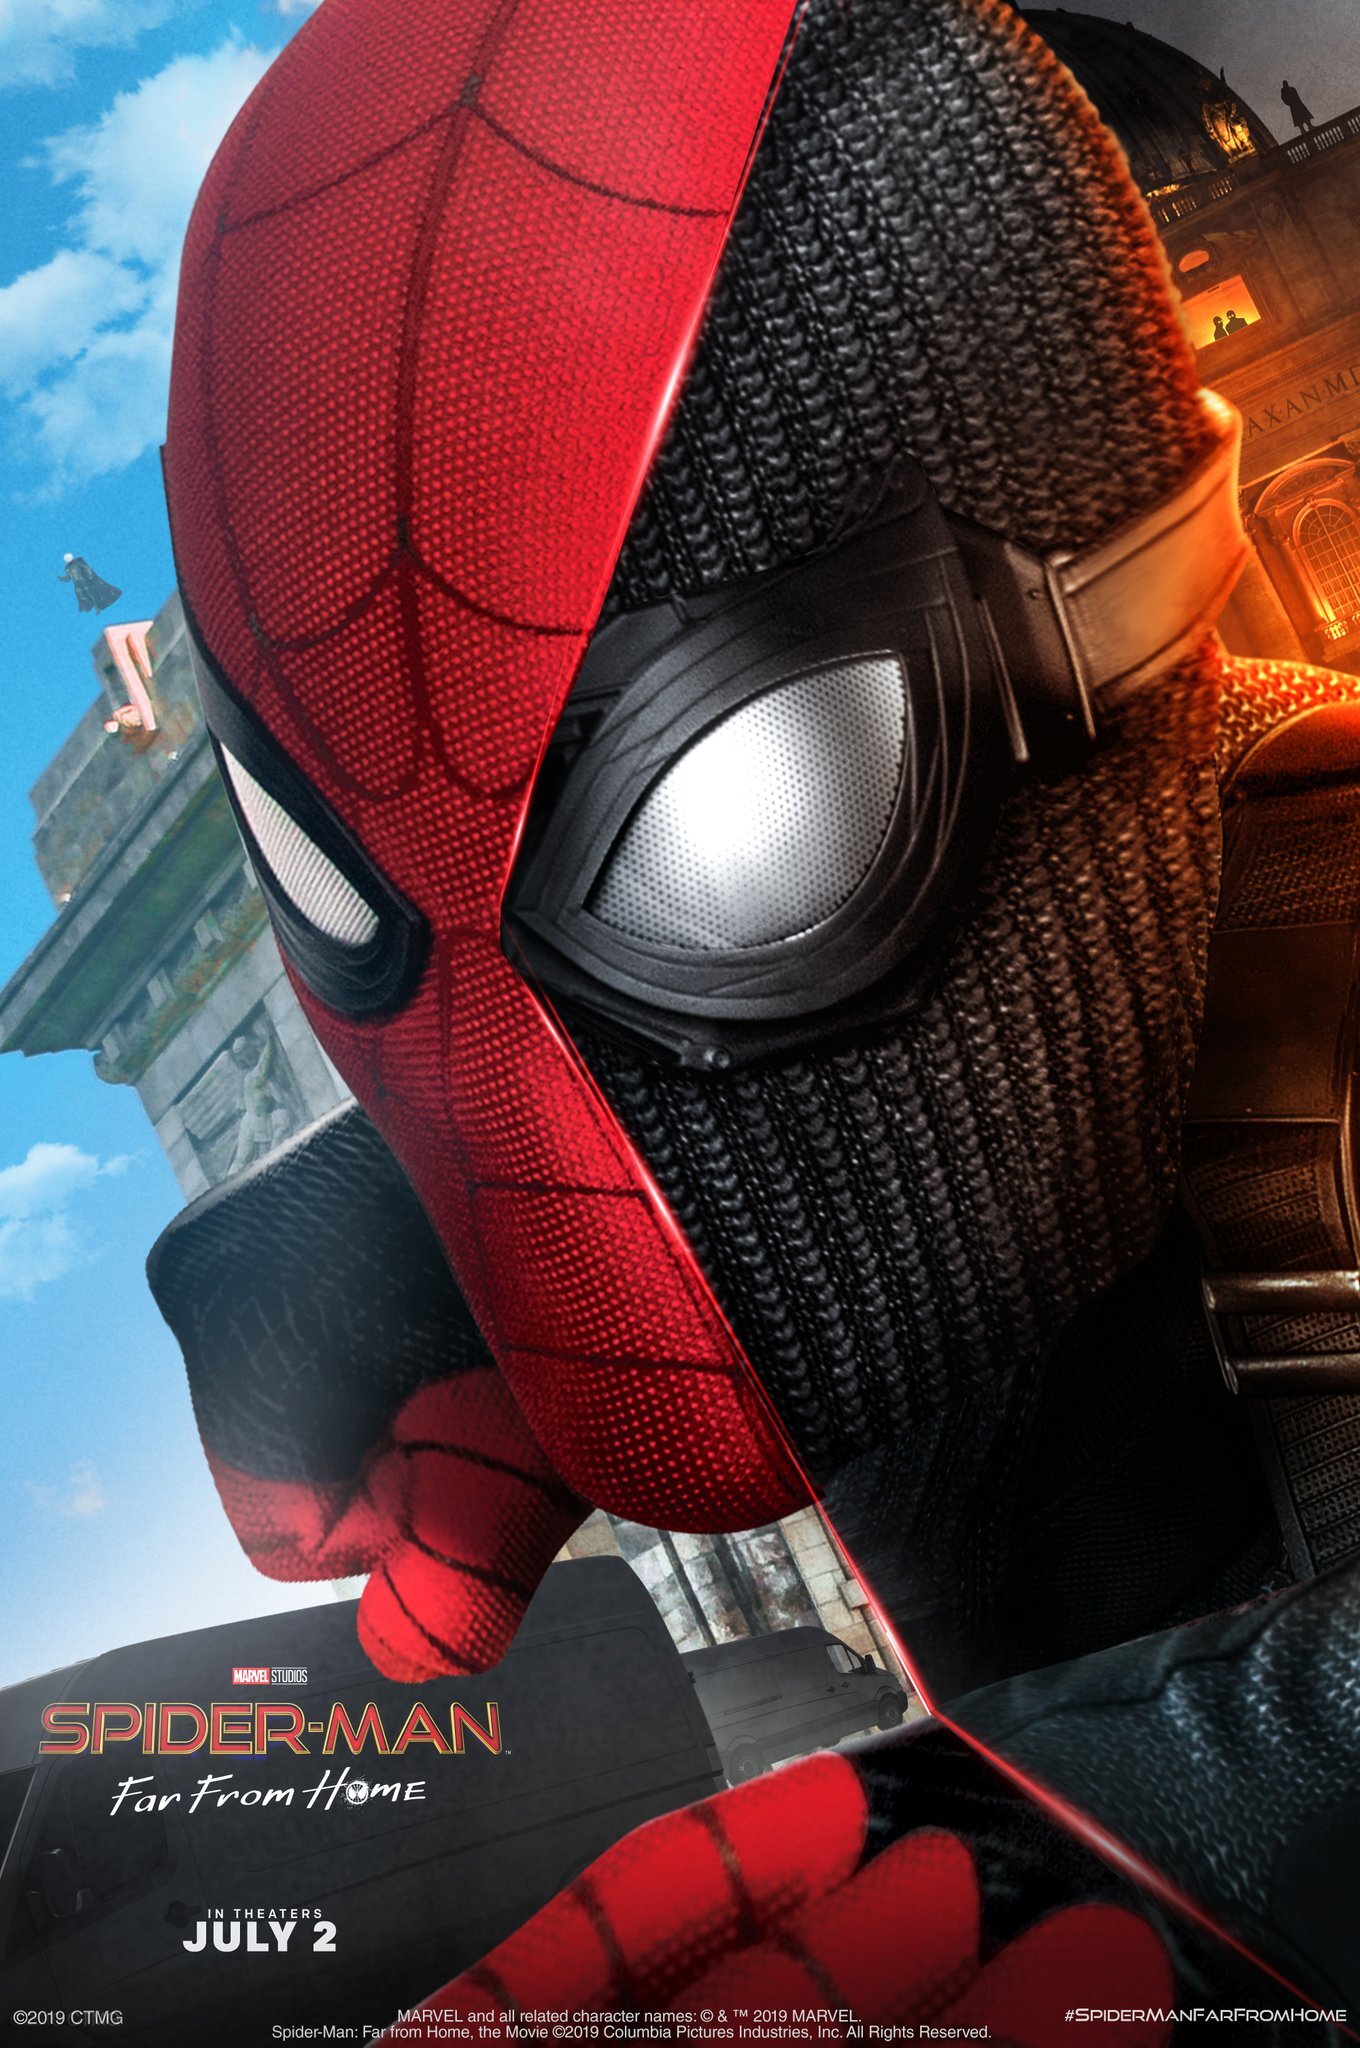 Spiderman Far From Home China Poster Wallpapers